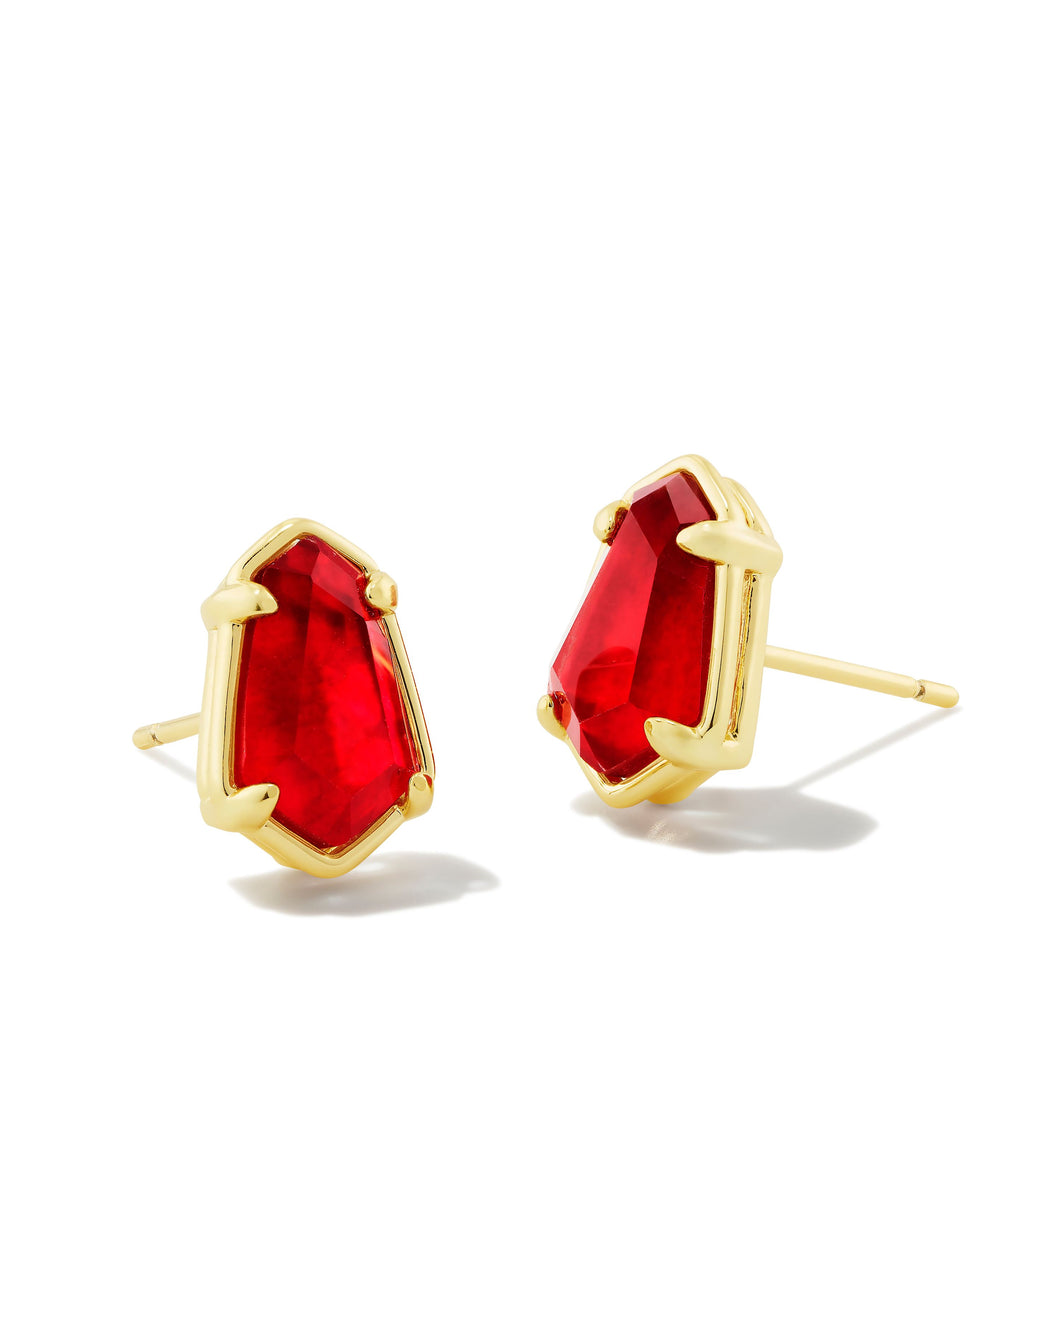 Alexandria Gold Stud Earrings in Cranberry Illsuion